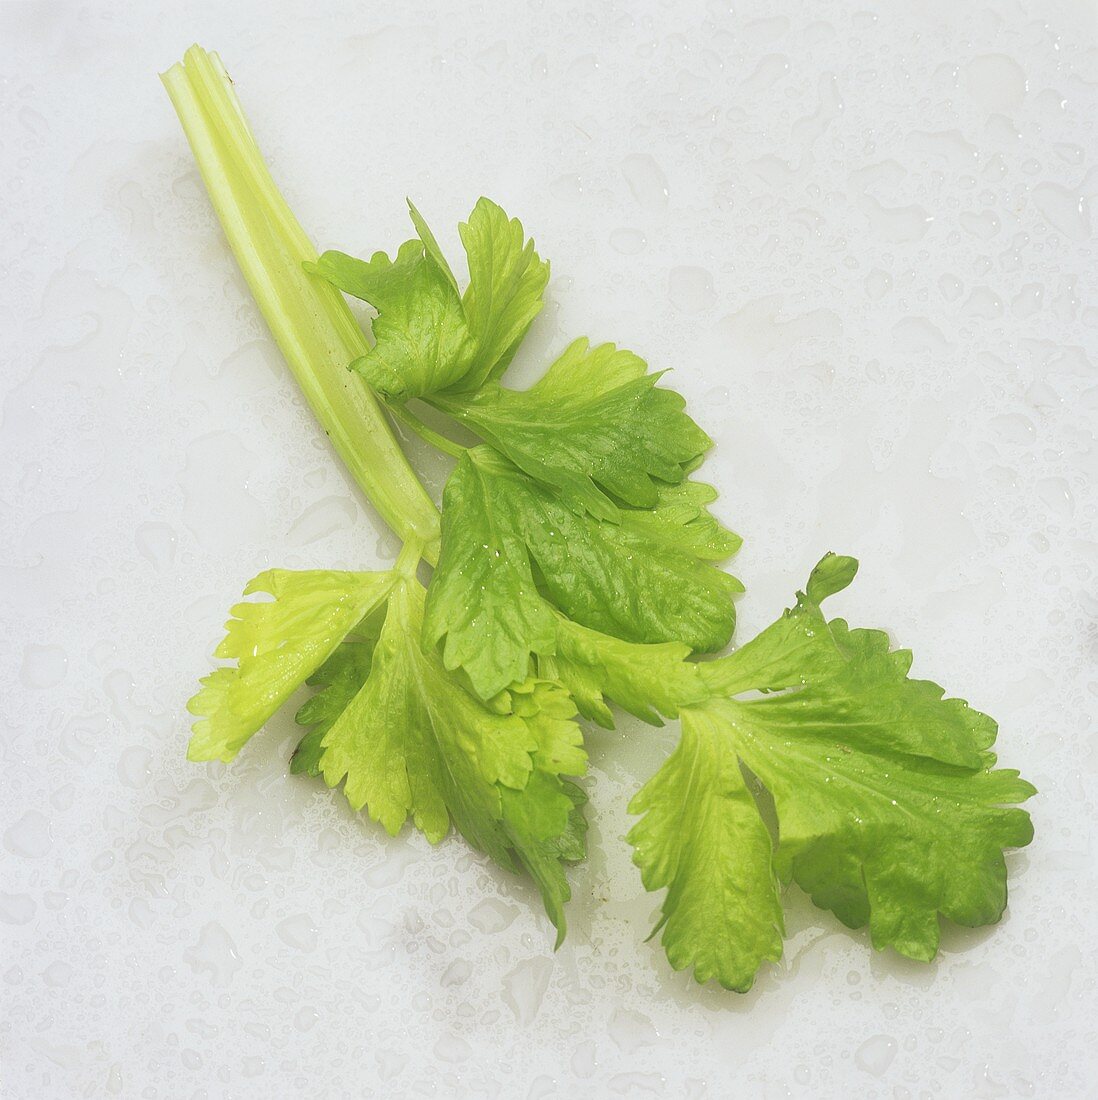 Celery leaf with drops of water on a light background